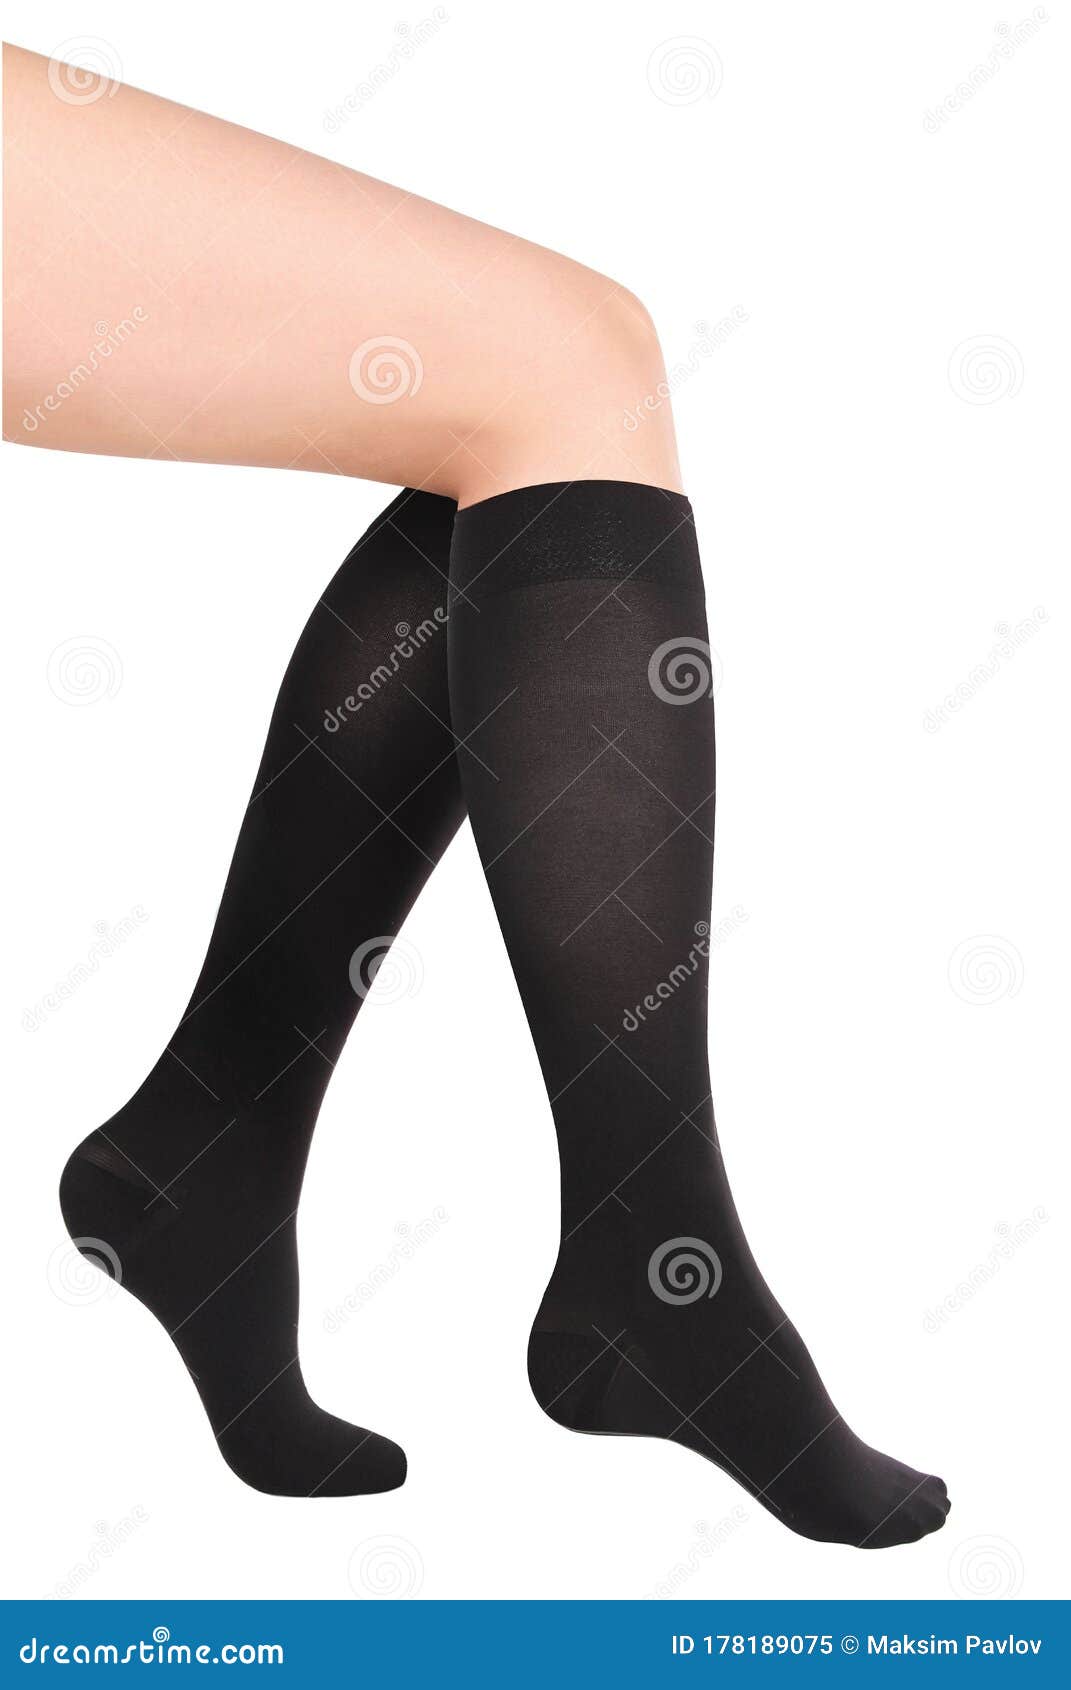 Closed Toe Calves. Compression Hosiery Stock Image - Image of high ...